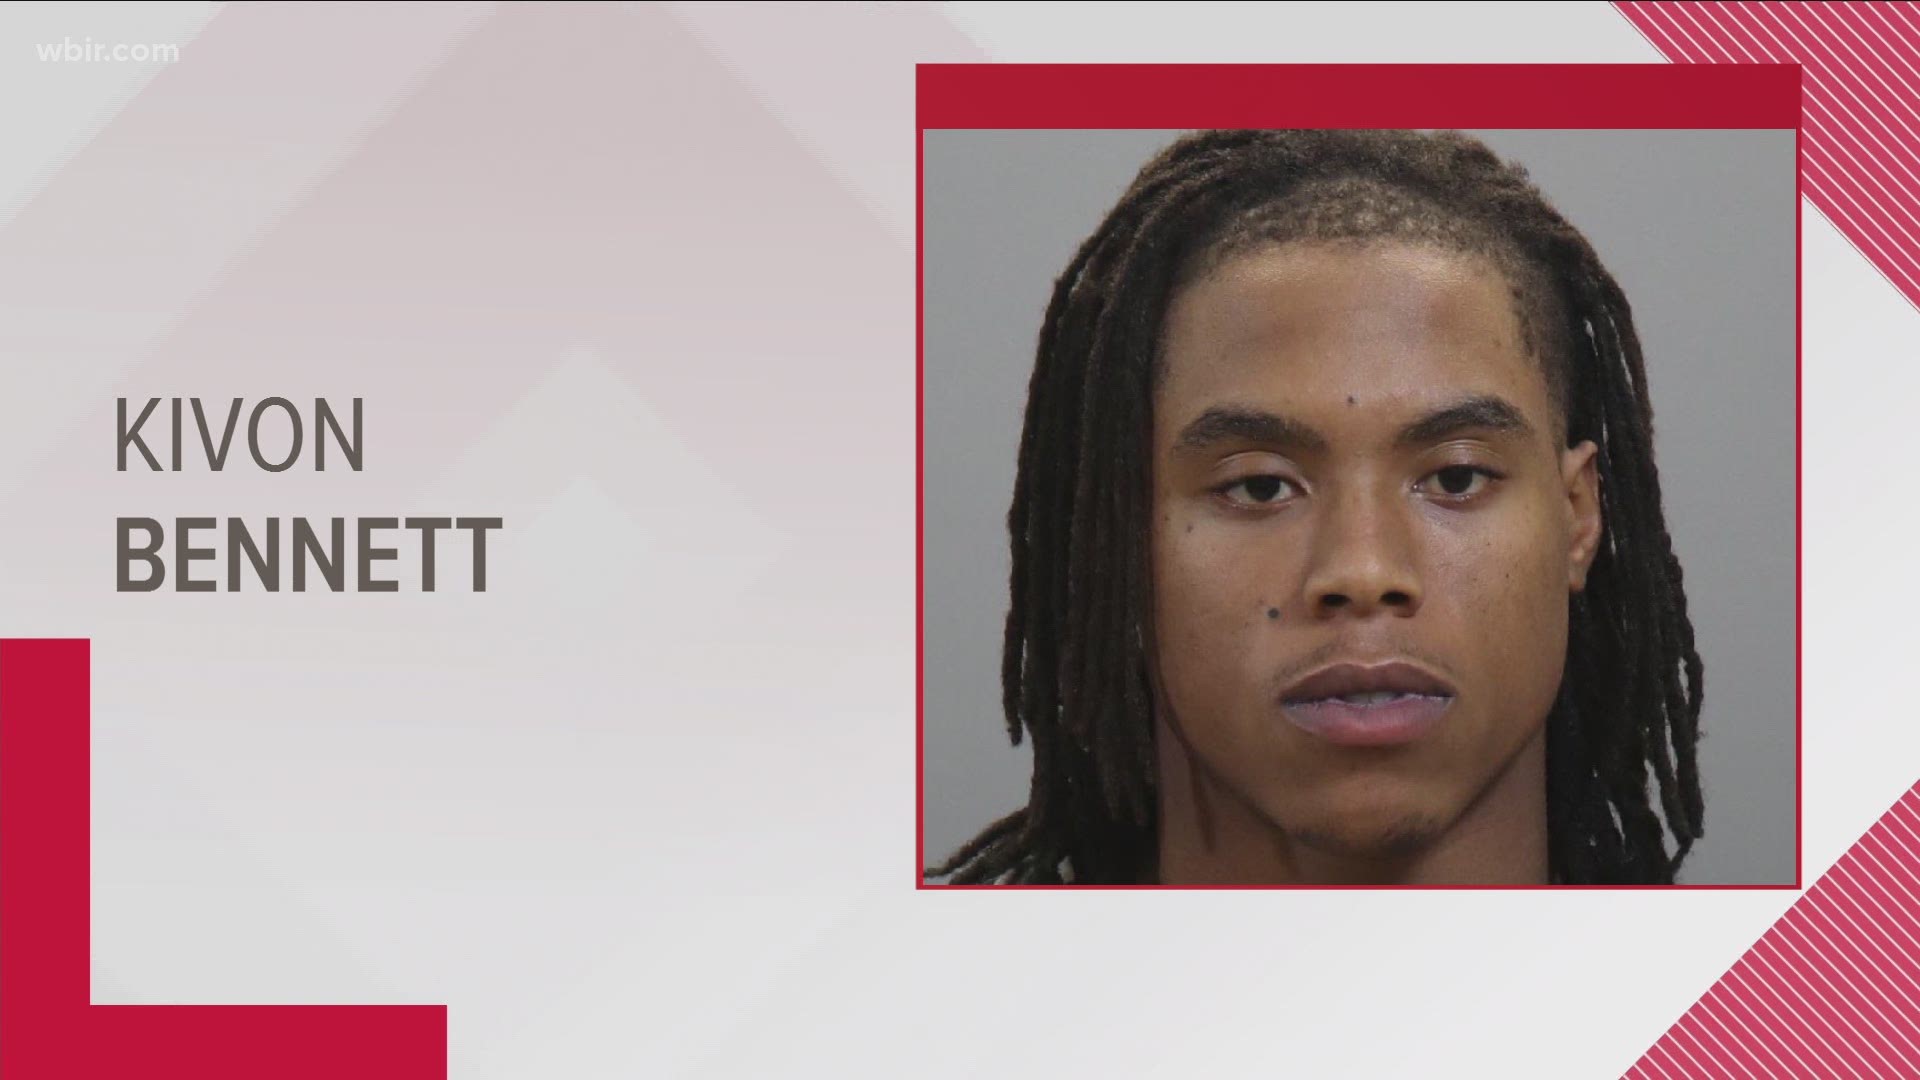 Warrants show UT police pulled over 20-year-old Kivon Bennett for speeding on Neyland Drive Tuesday morning, and police said they found marijuana and a gun.